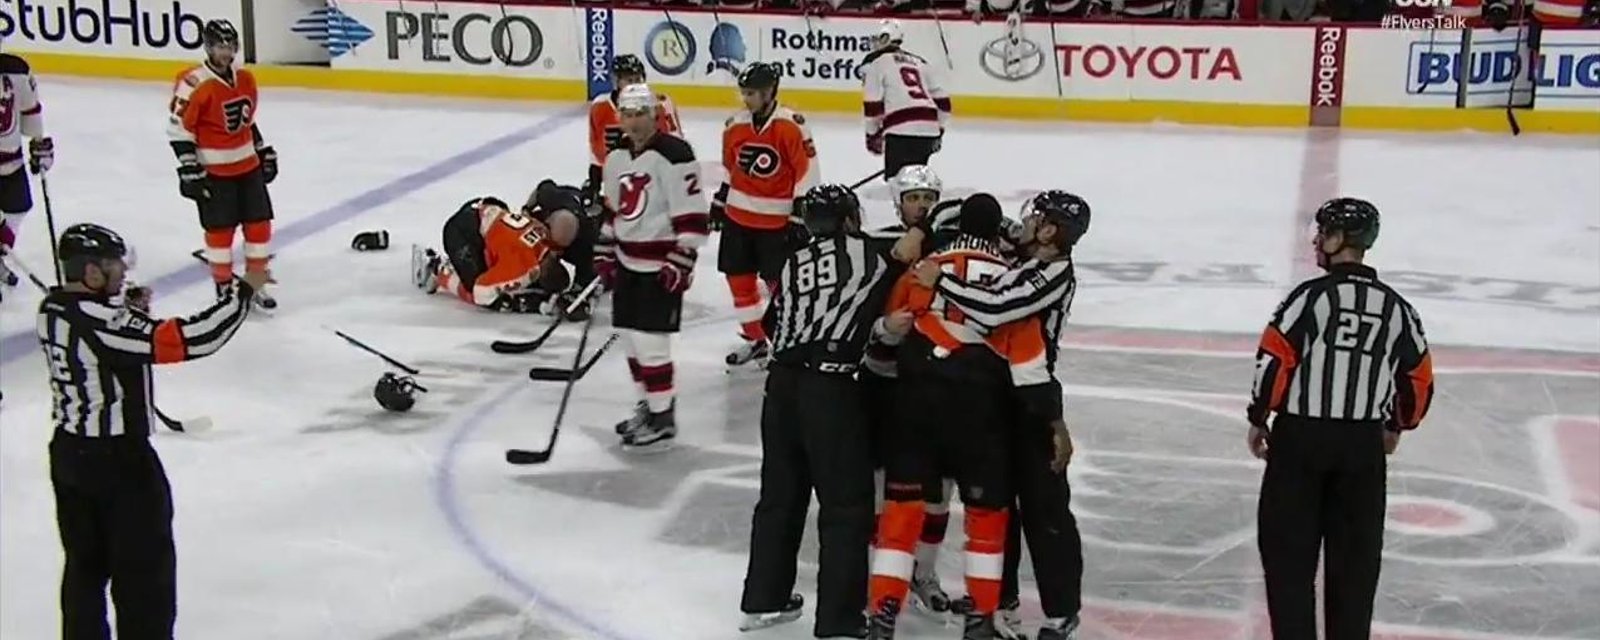 Flyers' defenseman out after questionable hit. 